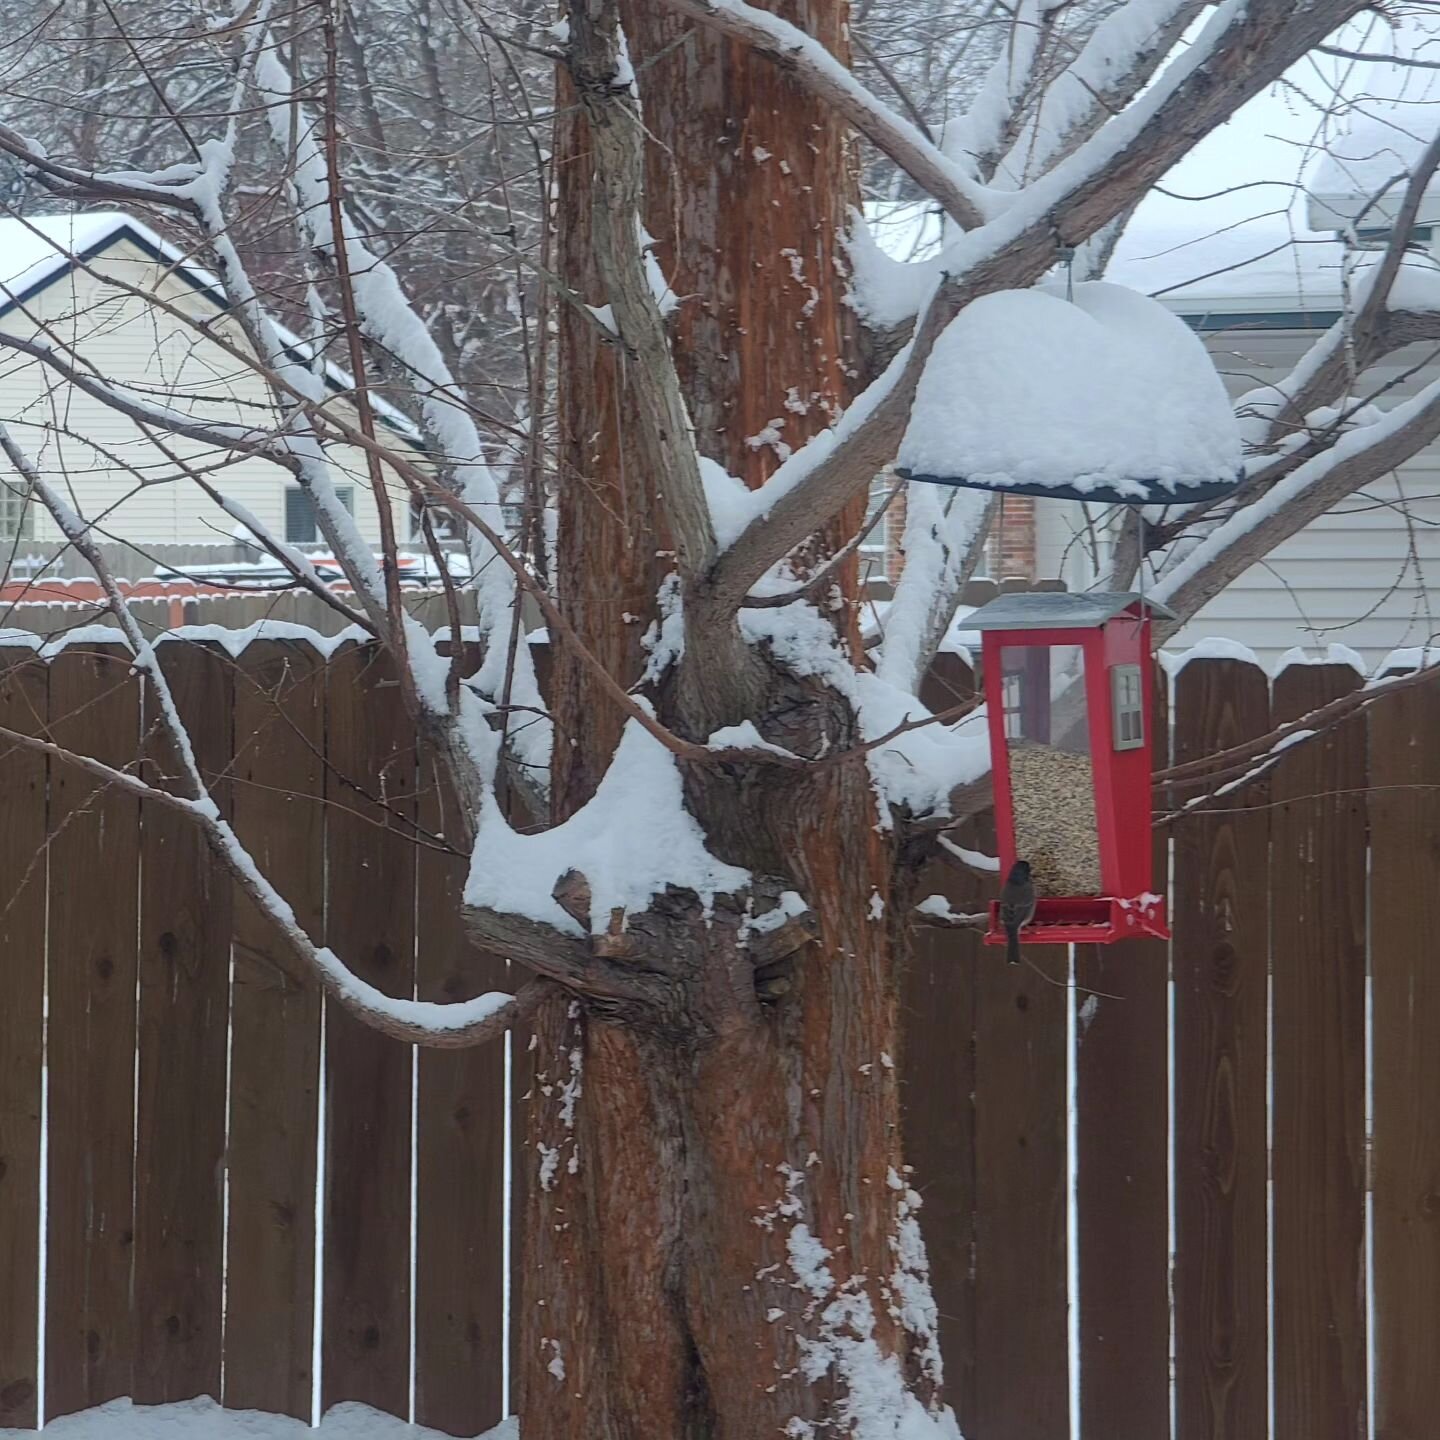 Characters in my snow-capped backyard, real and imagined! 

#meridianidaho #idahosnow